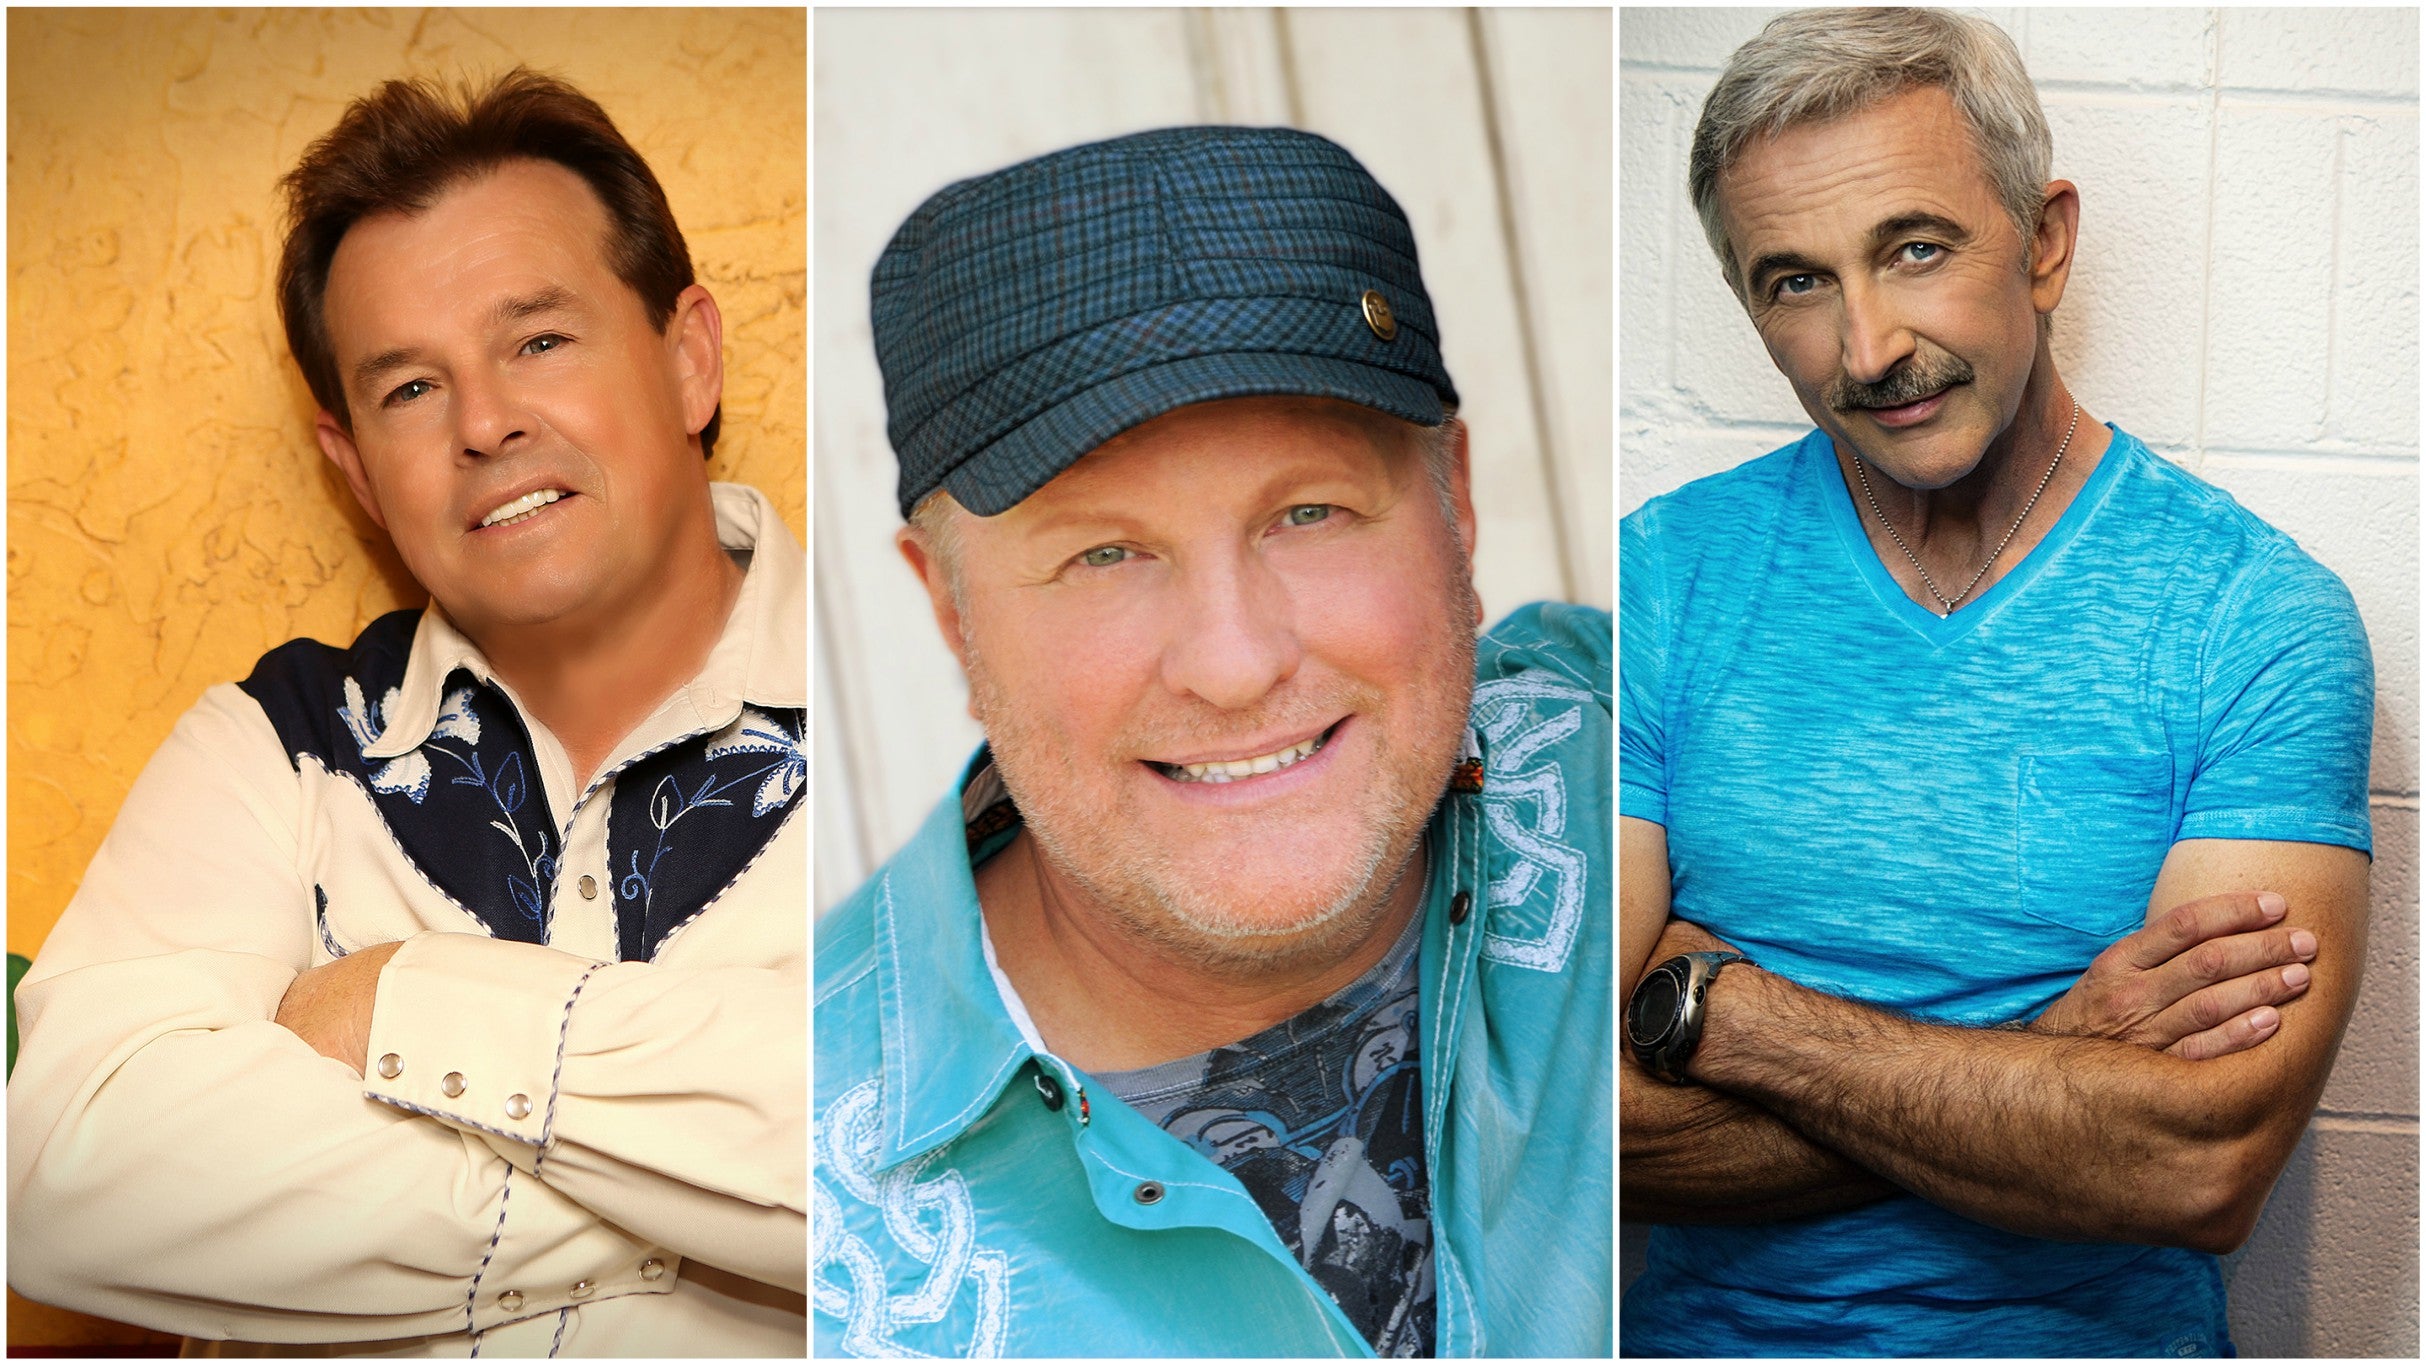 Roots and Boots - Sammy Kershaw, Aaron Tippin and Collin Raye in Saint Charles promo photo for Venue presale offer code